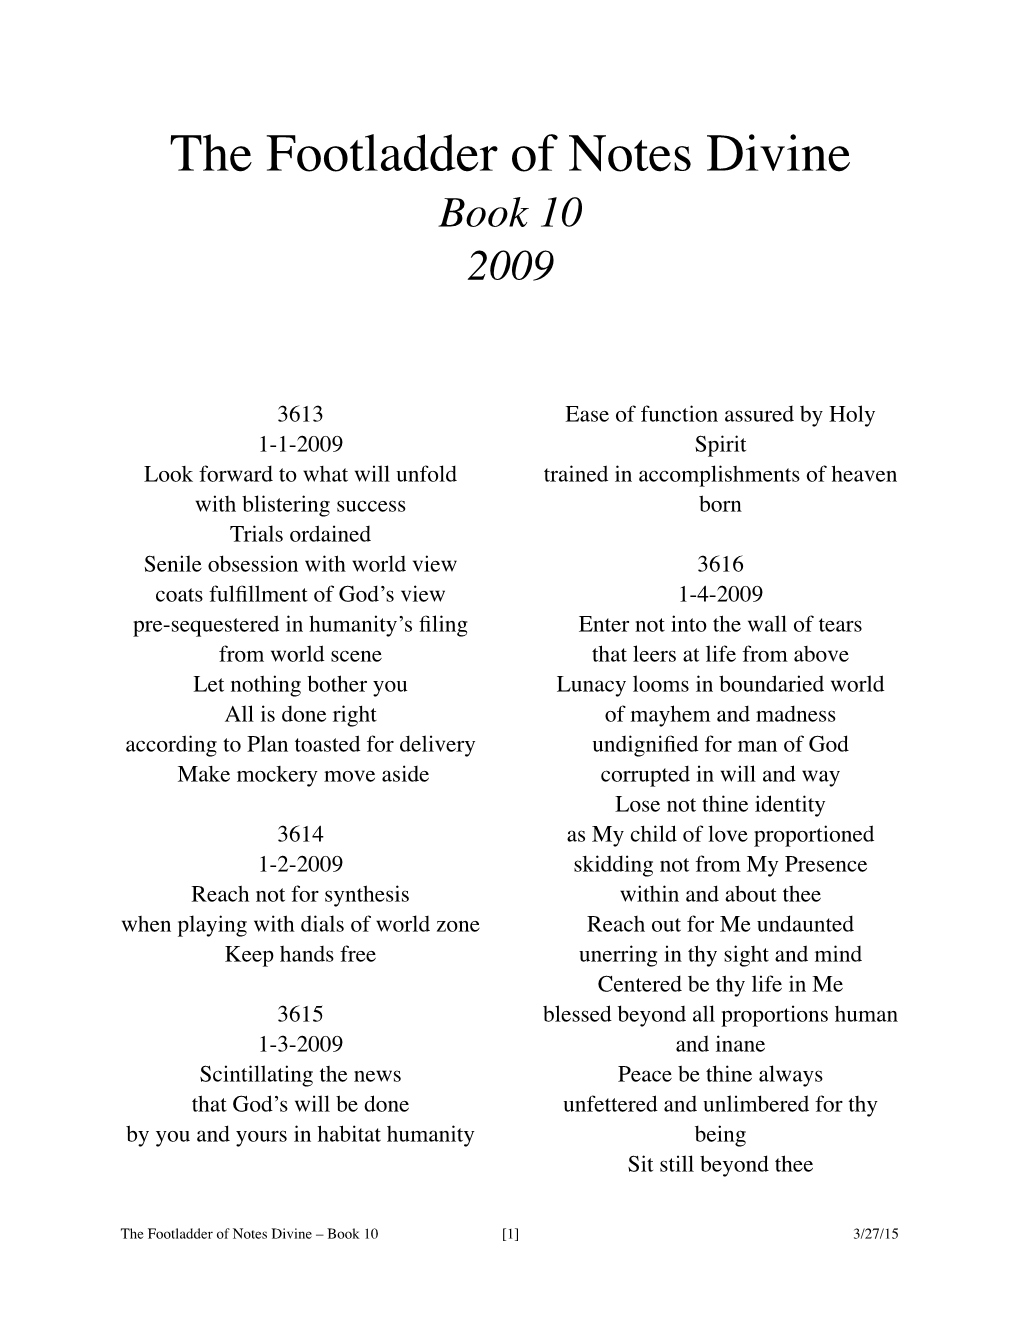 The Footladder of Notes Divine Book 10 2009